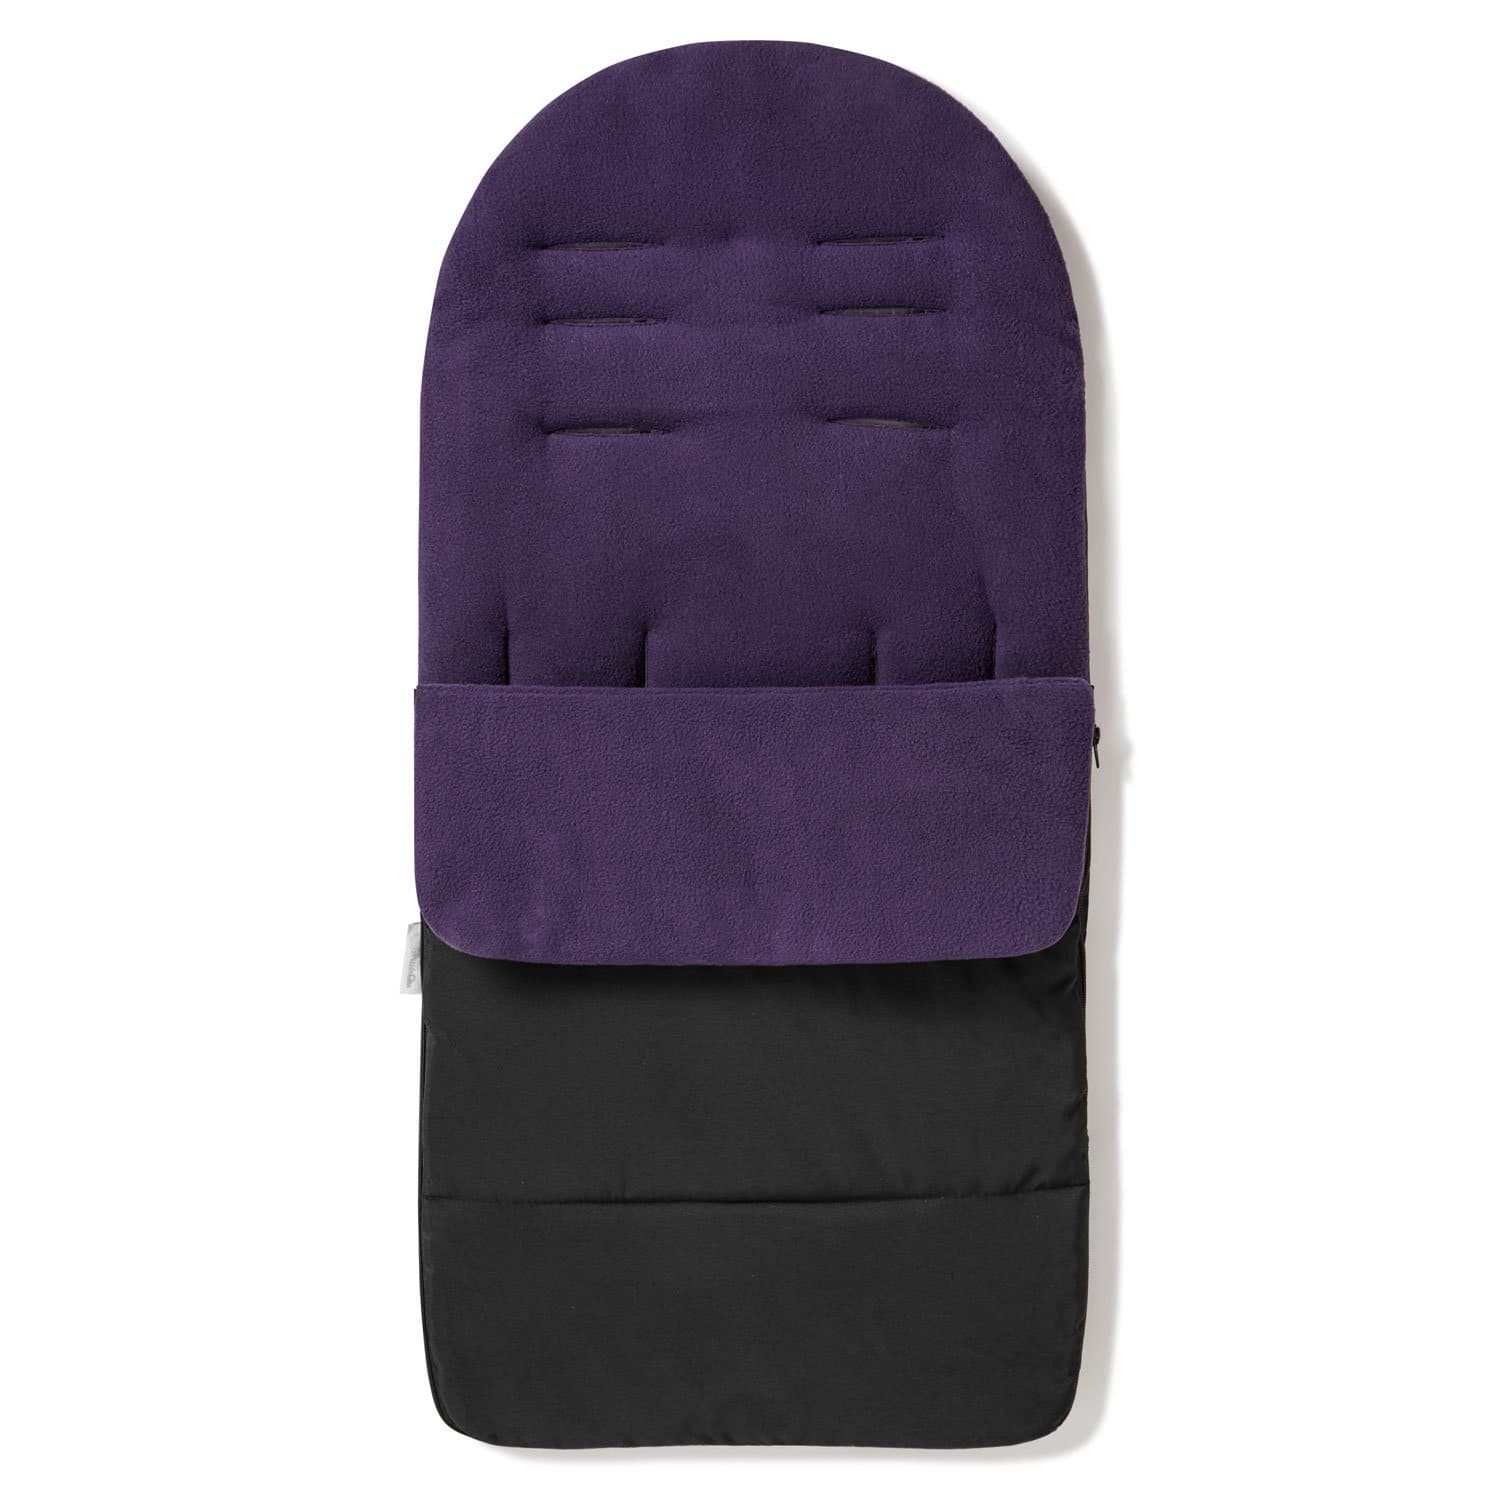 Premium Footmuff / Cosy Toes Compatible with Esprit - Plum Purple / Fits All Models | For Your Little One